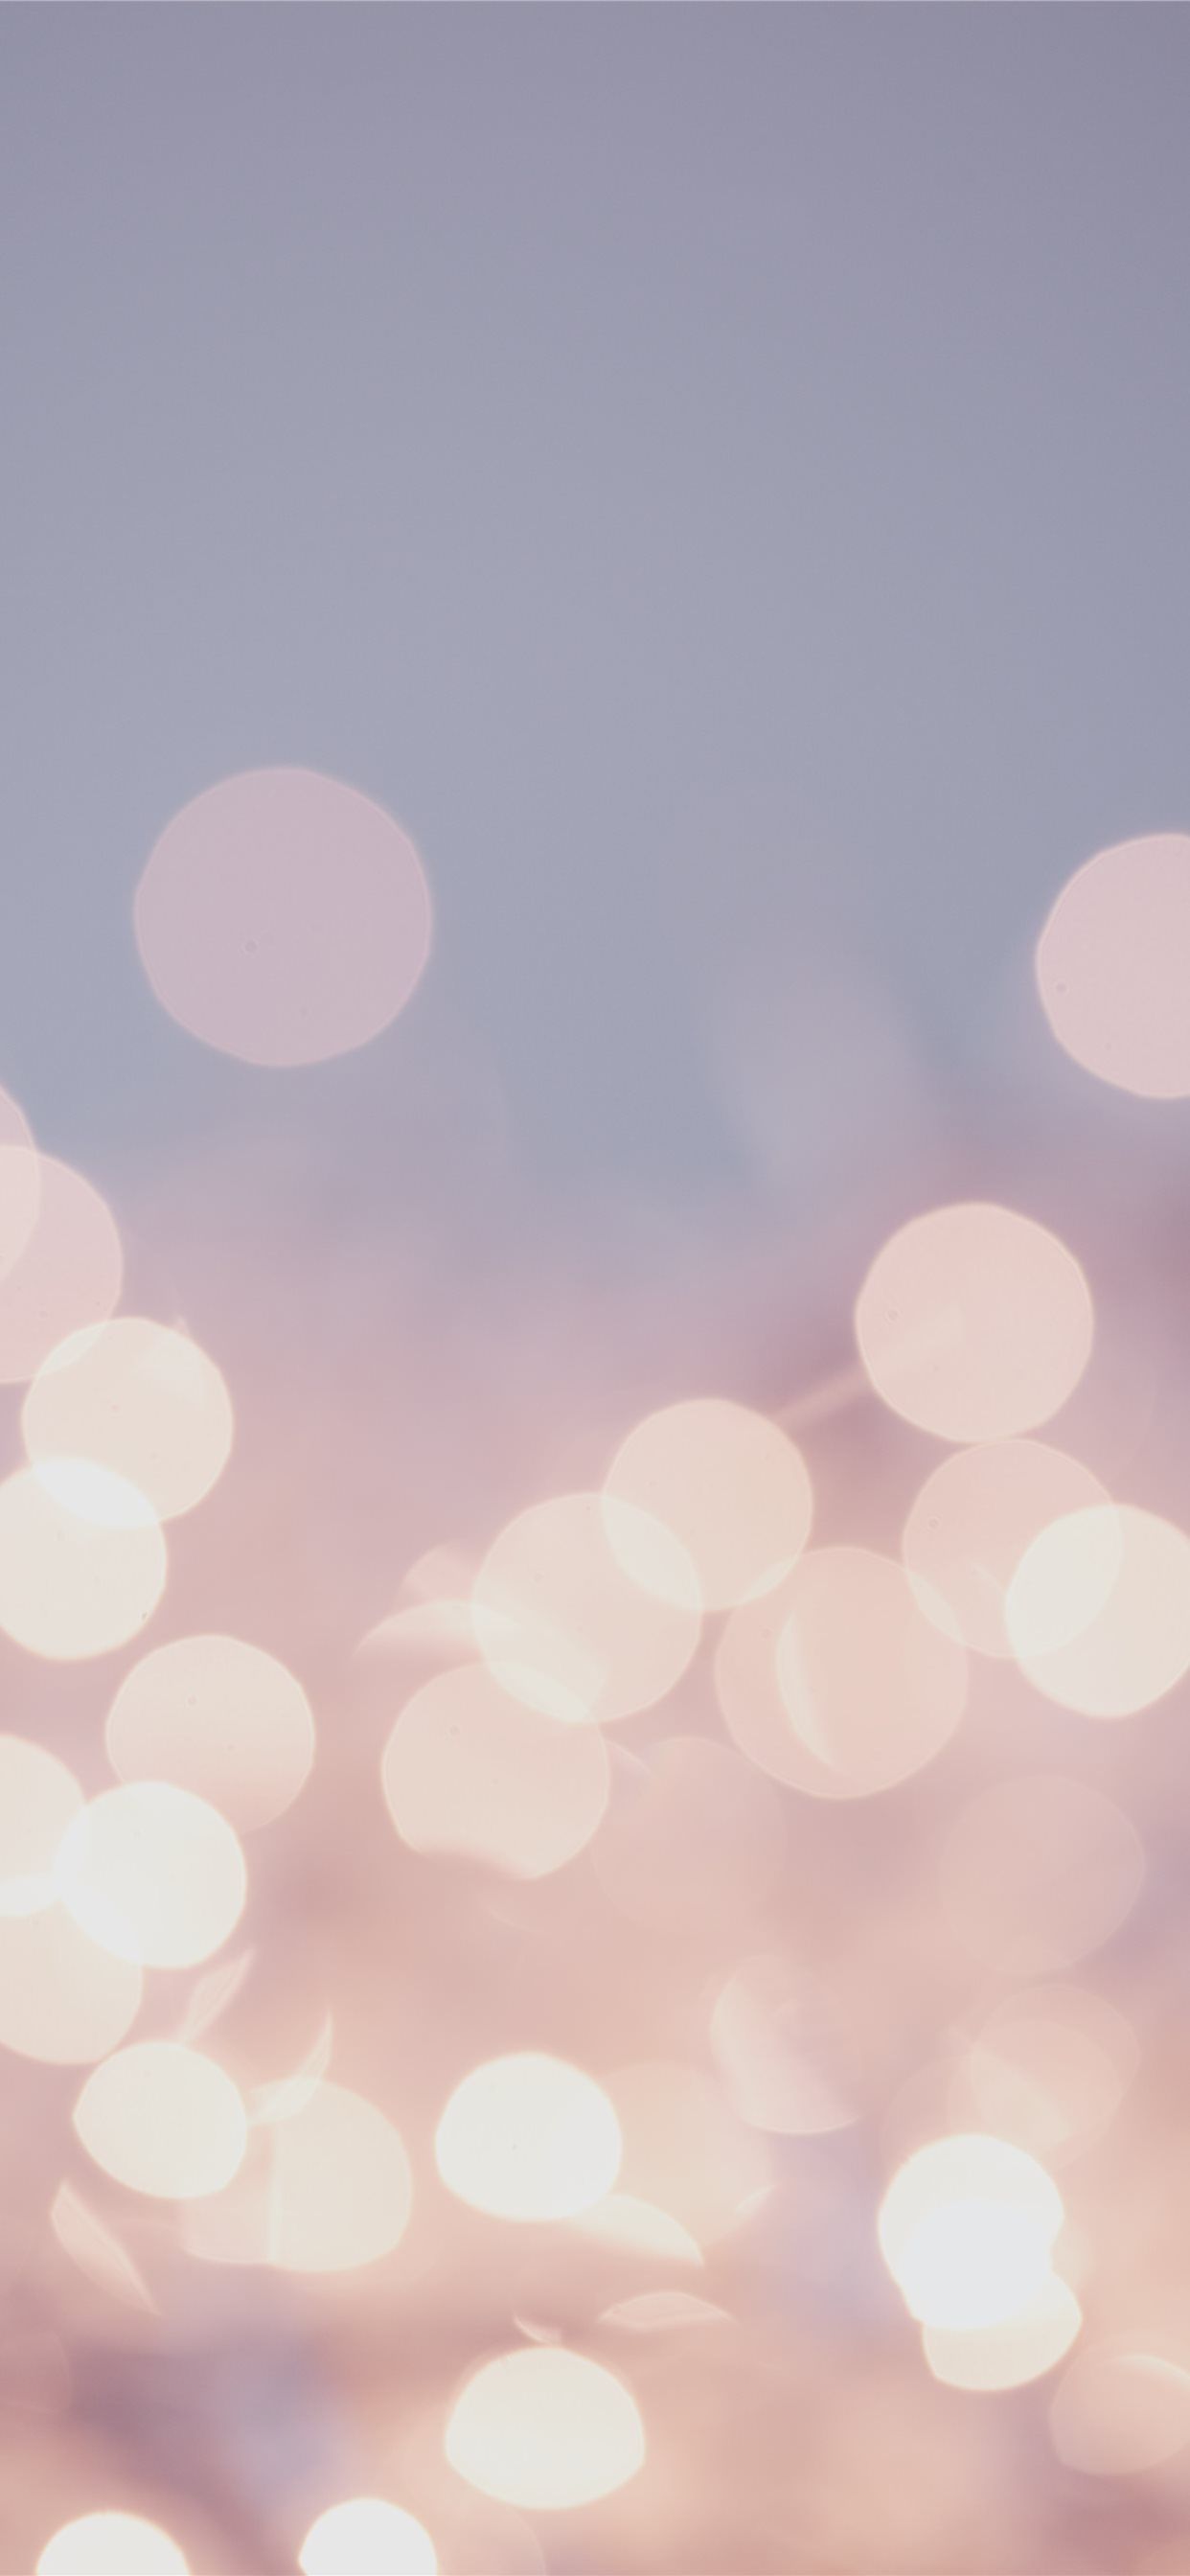 Pretty pastel bokeh fairy lights background iPhone X Wallpaper Free Download